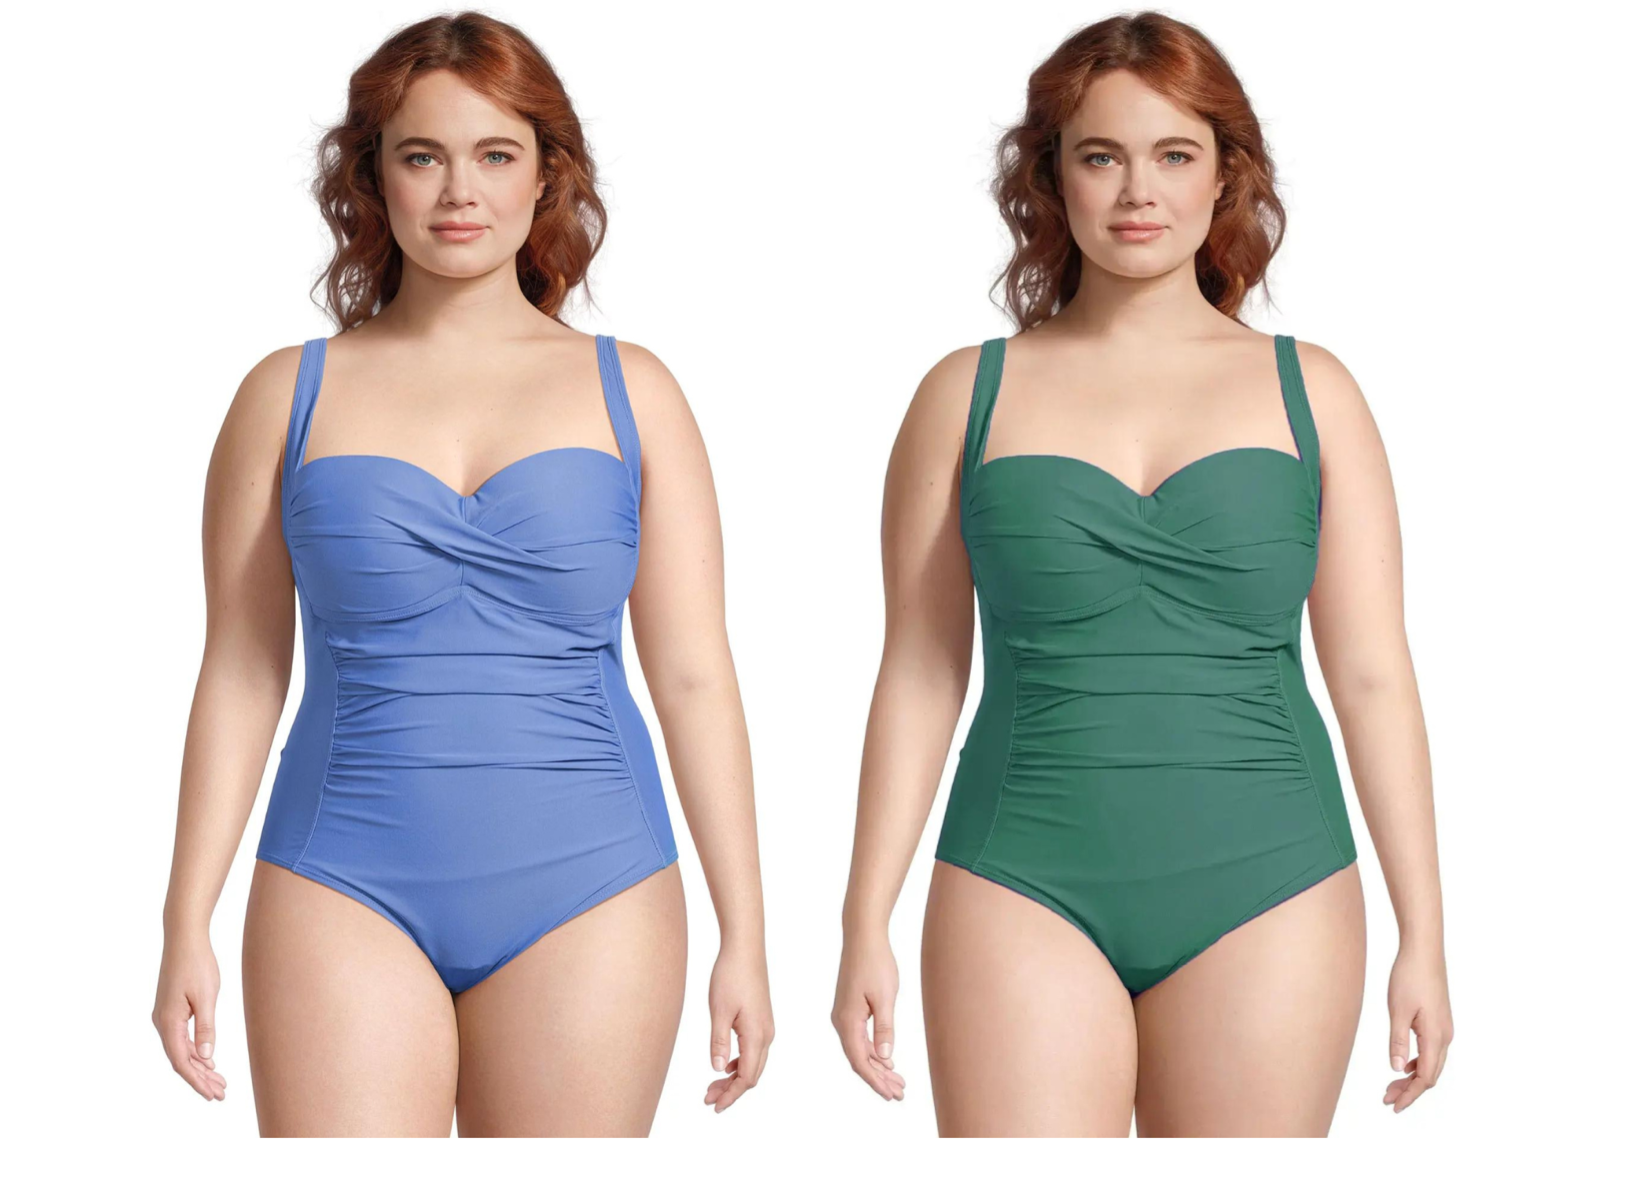 Women's Plus Size Ruched One-Piece Swimsuit - Assorted Colors